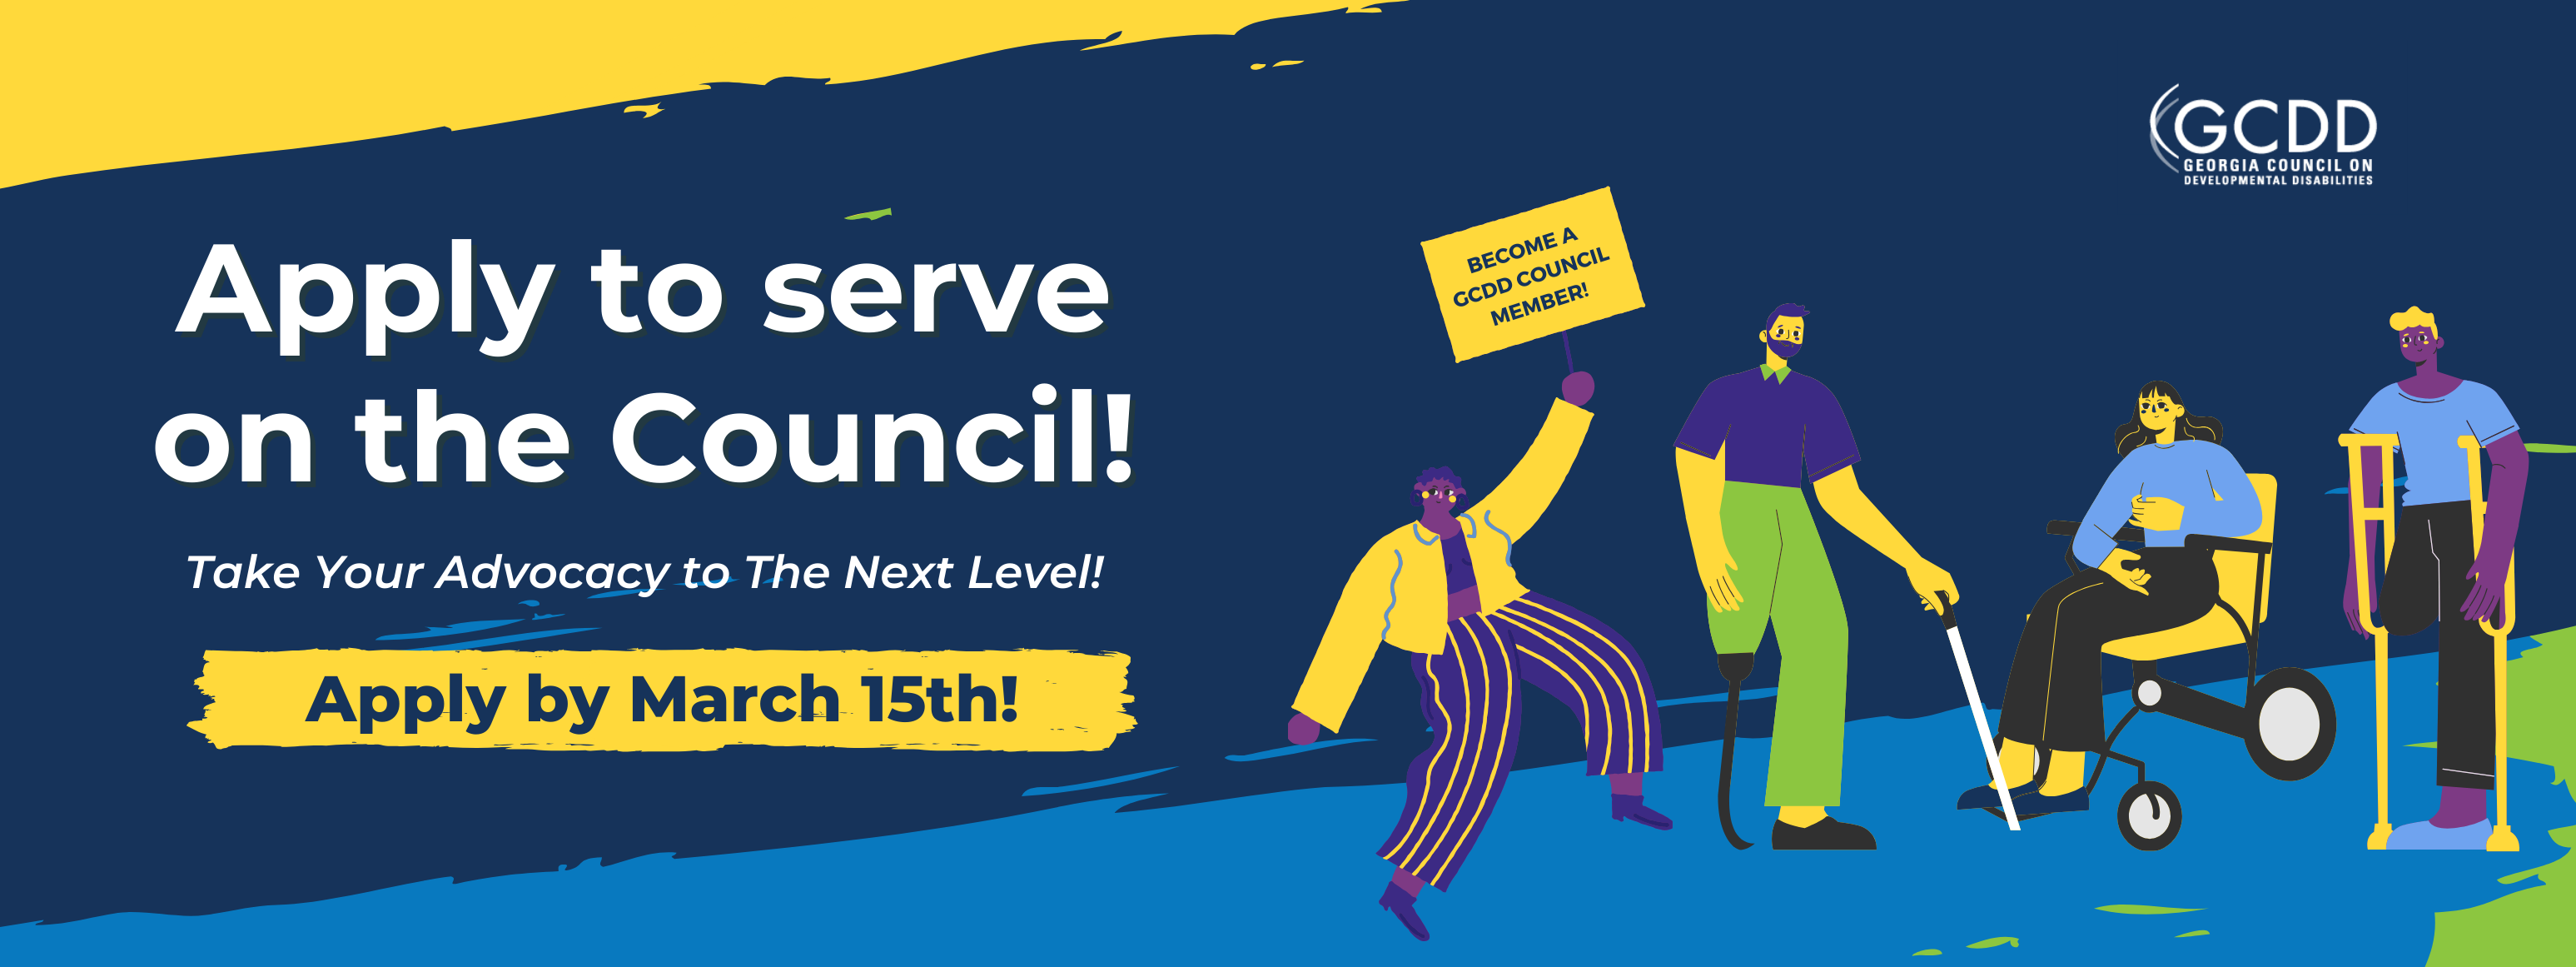 Apply to serve on the council by March 15th!